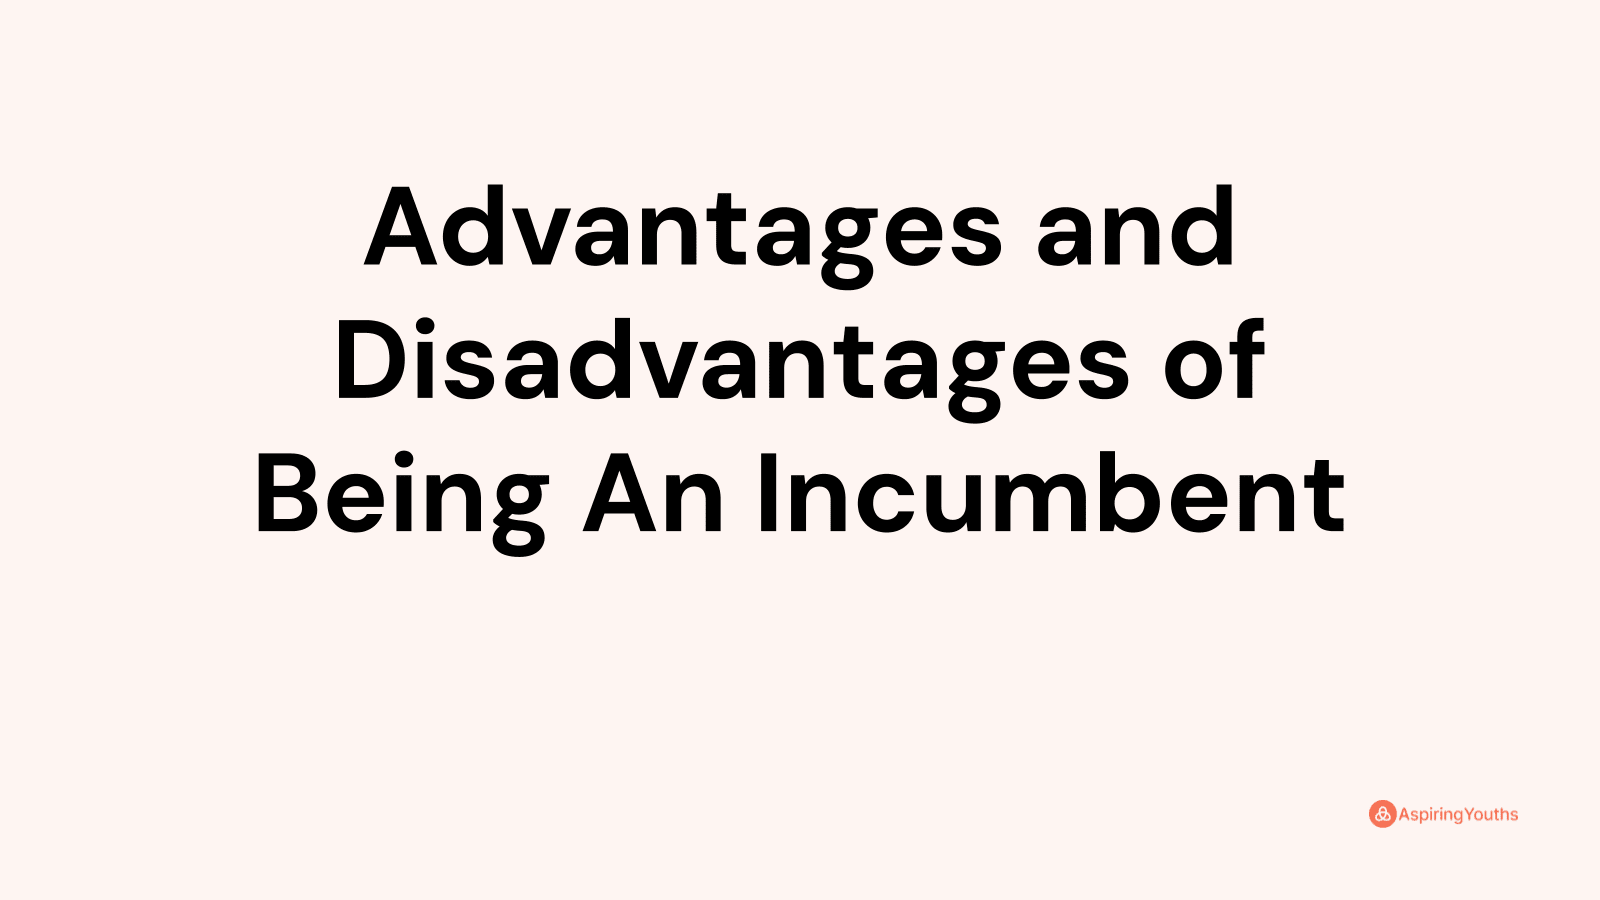 Advantages and disadvantages of Being An Incumbent